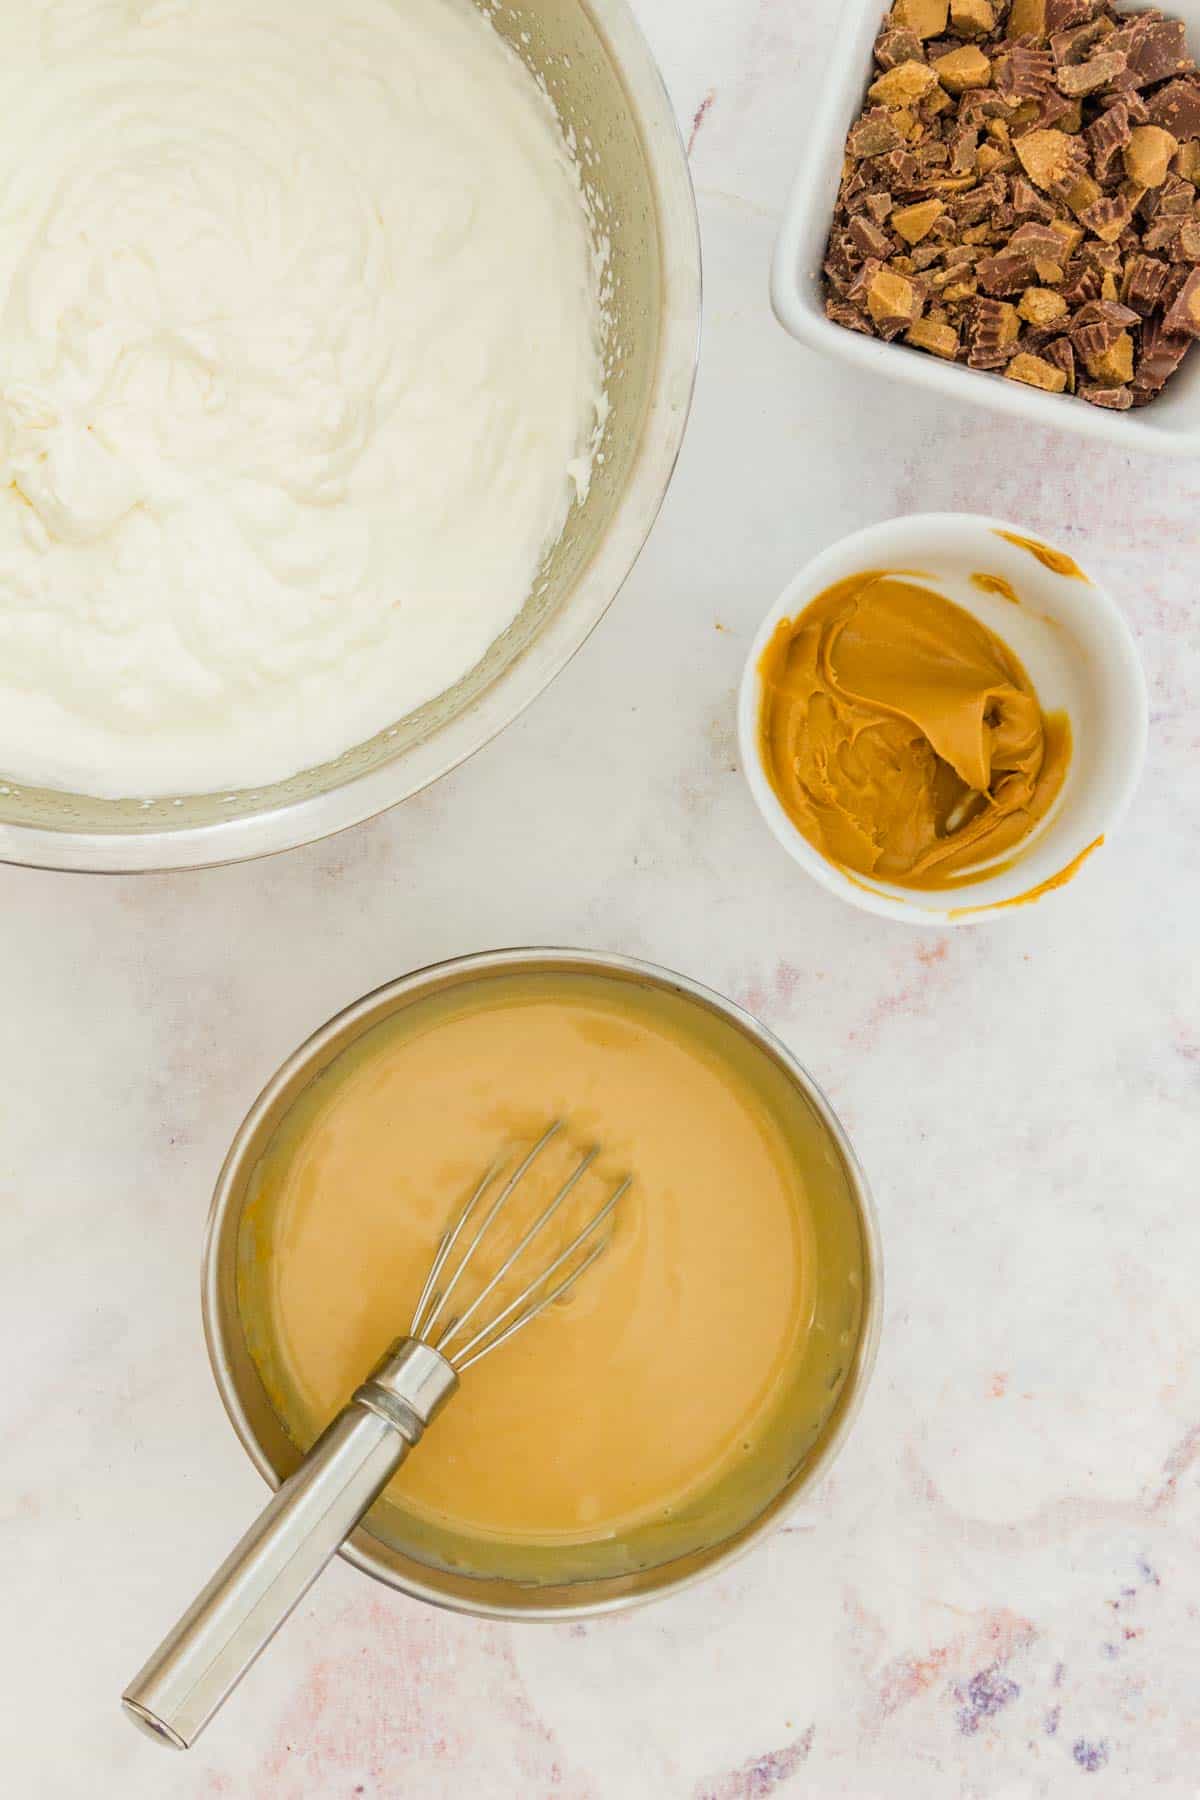 Sweetened condensed milk whisked together with peanut butter in a small bowl, next to a large metal bowl of whipped cream.